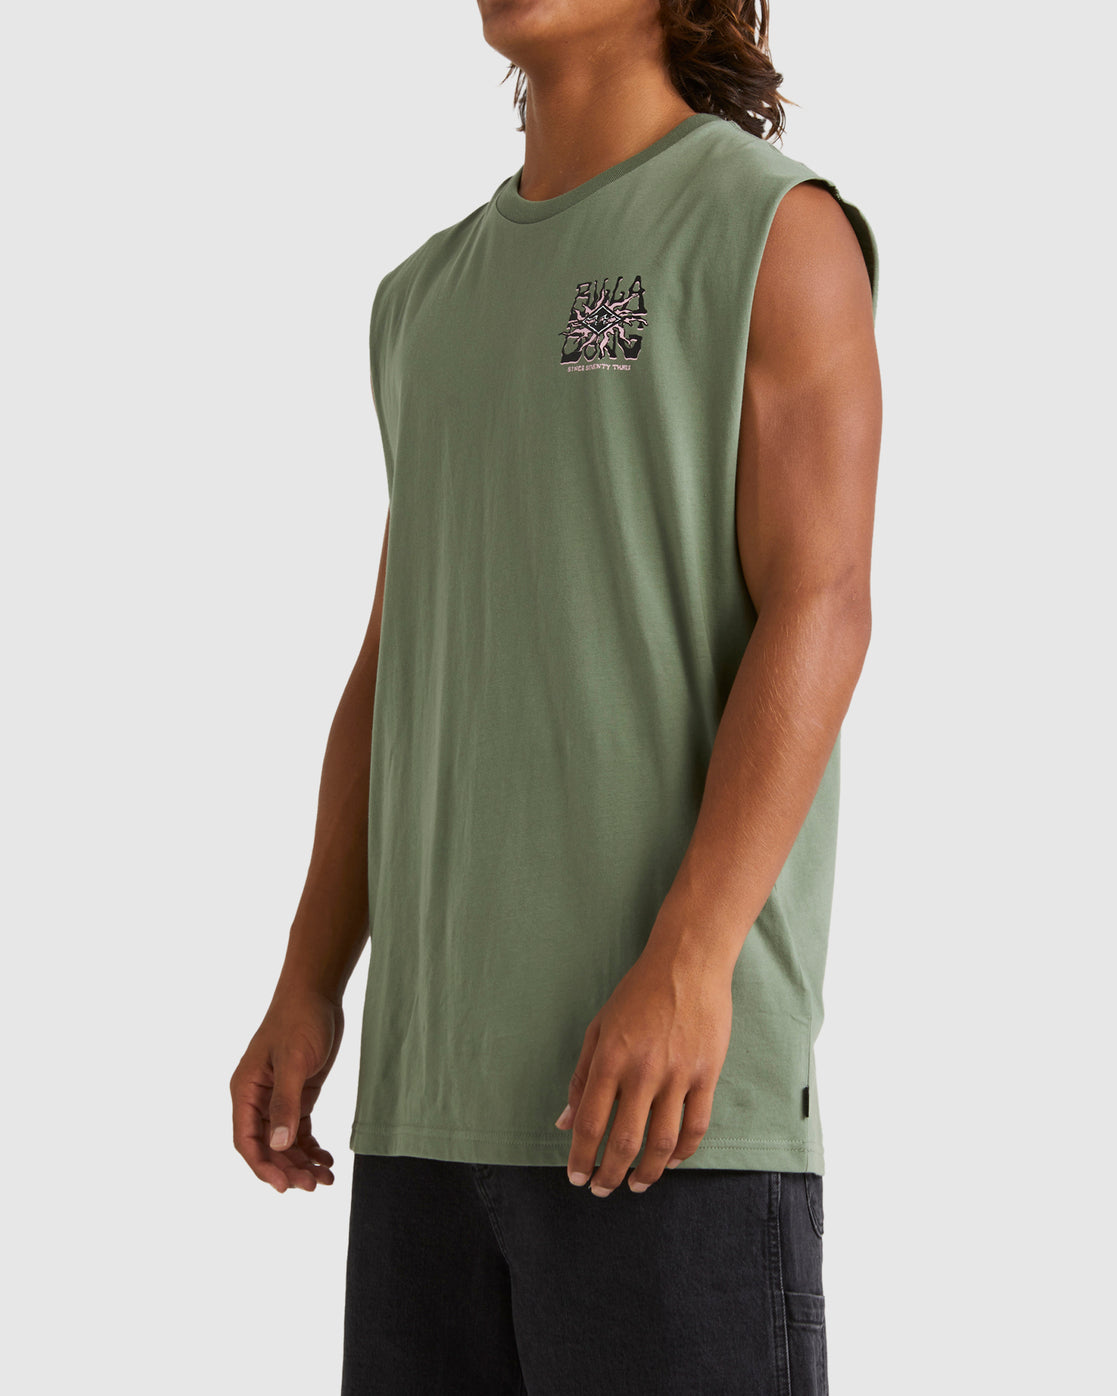 Billabong Seventy Three Sun Muscle Tee in sage from side